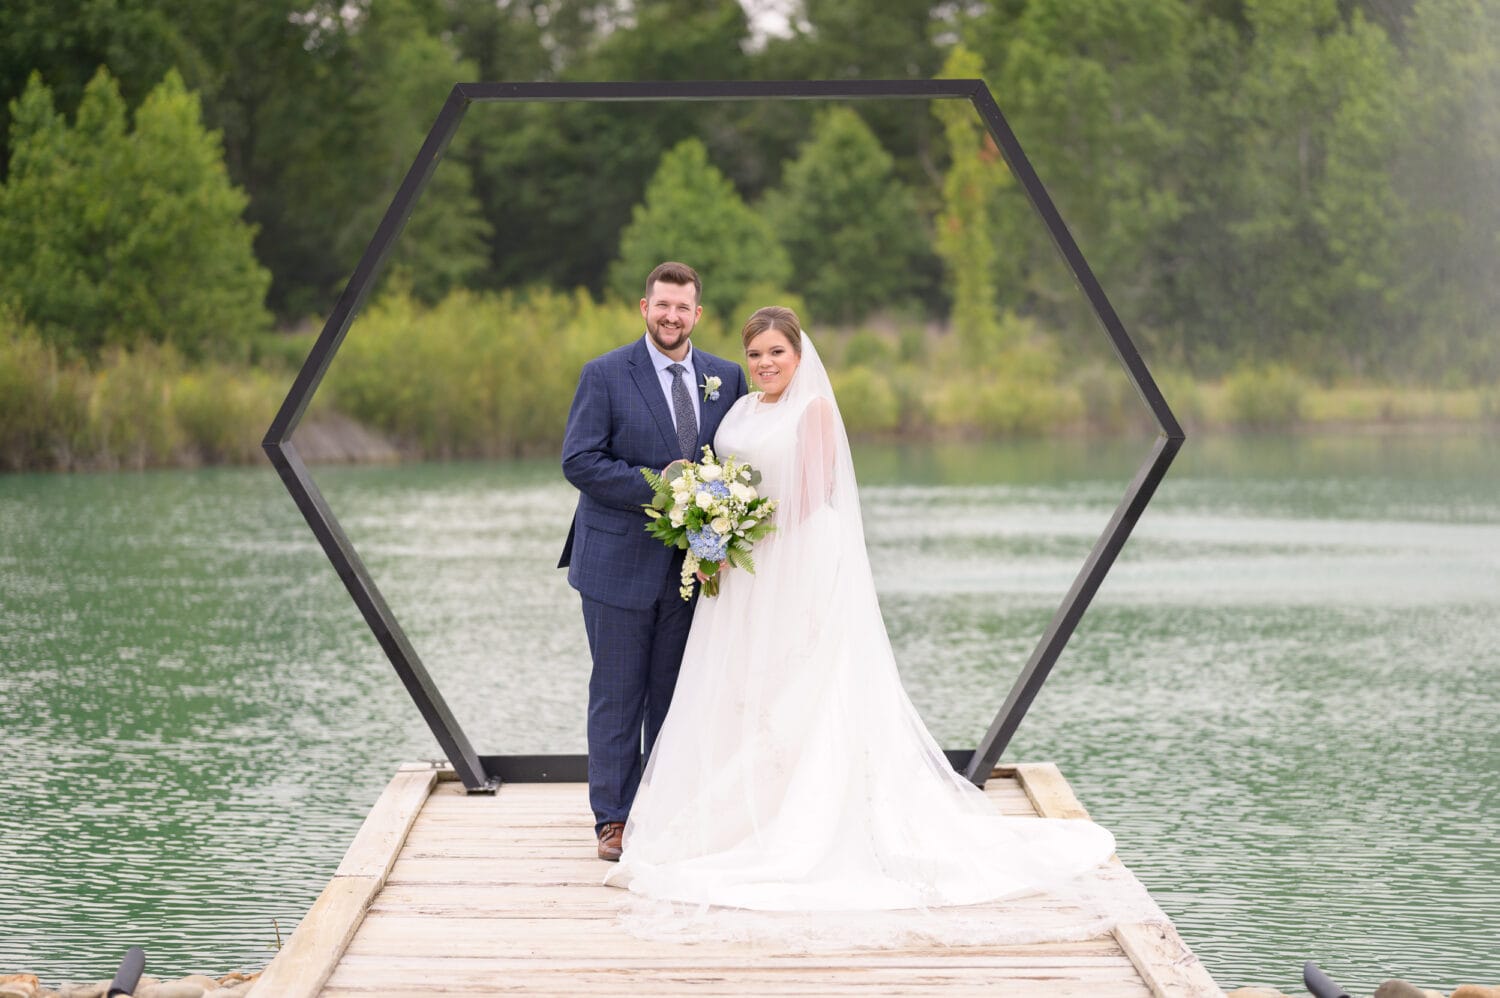 Portraits of the bride and groom in front of the hexagon on the lake - The Venue at White Oaks Farm